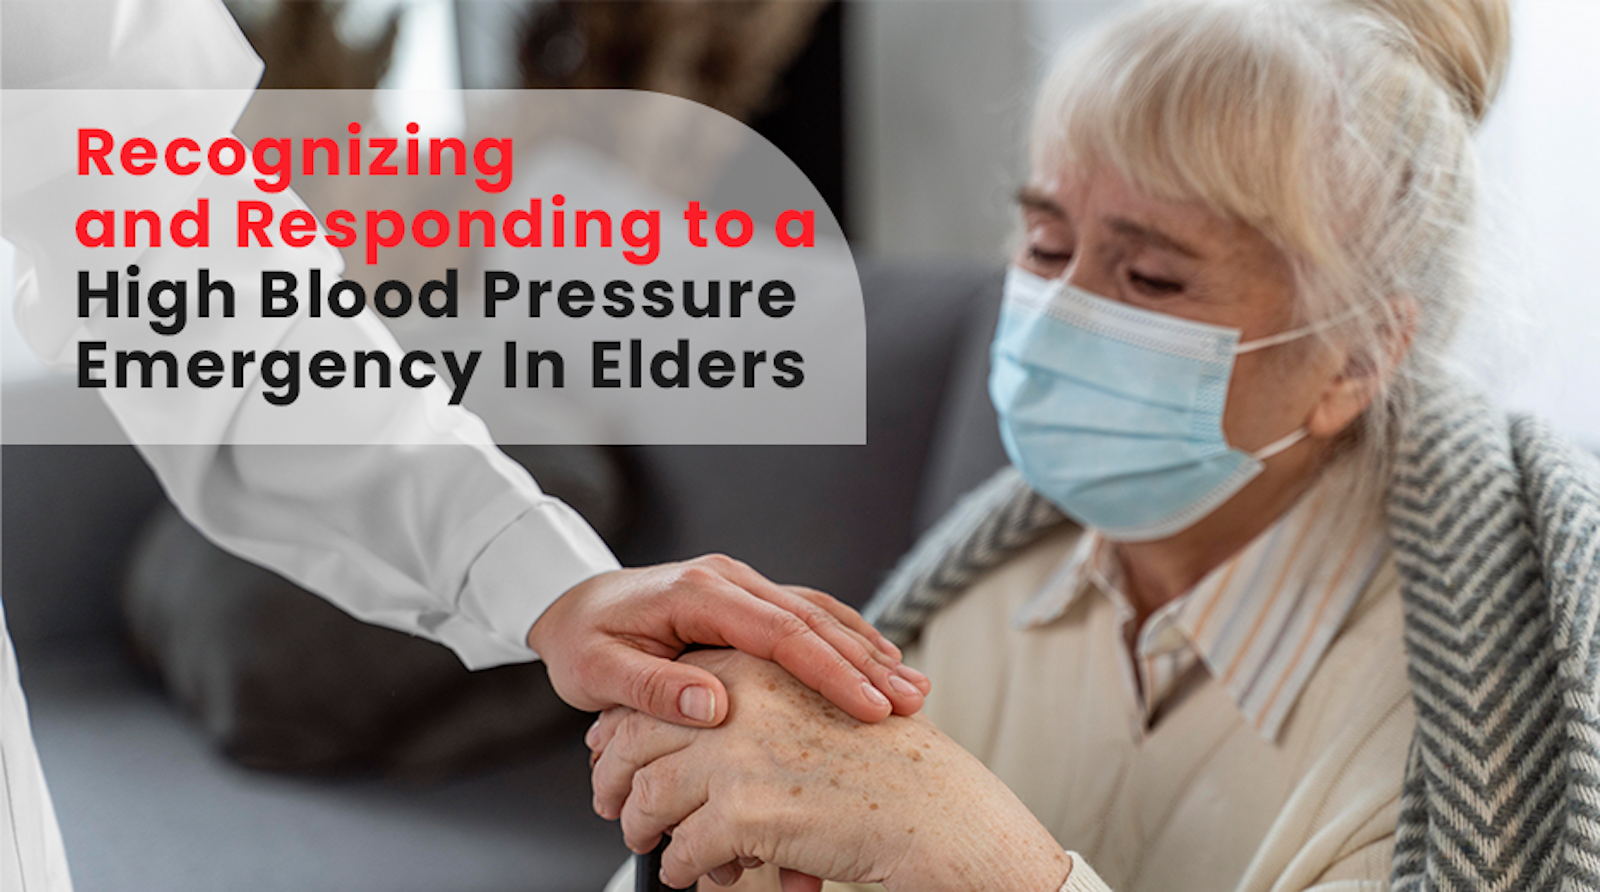 Recognizing and Responding to a High Blood Pressure Emergency In Elders